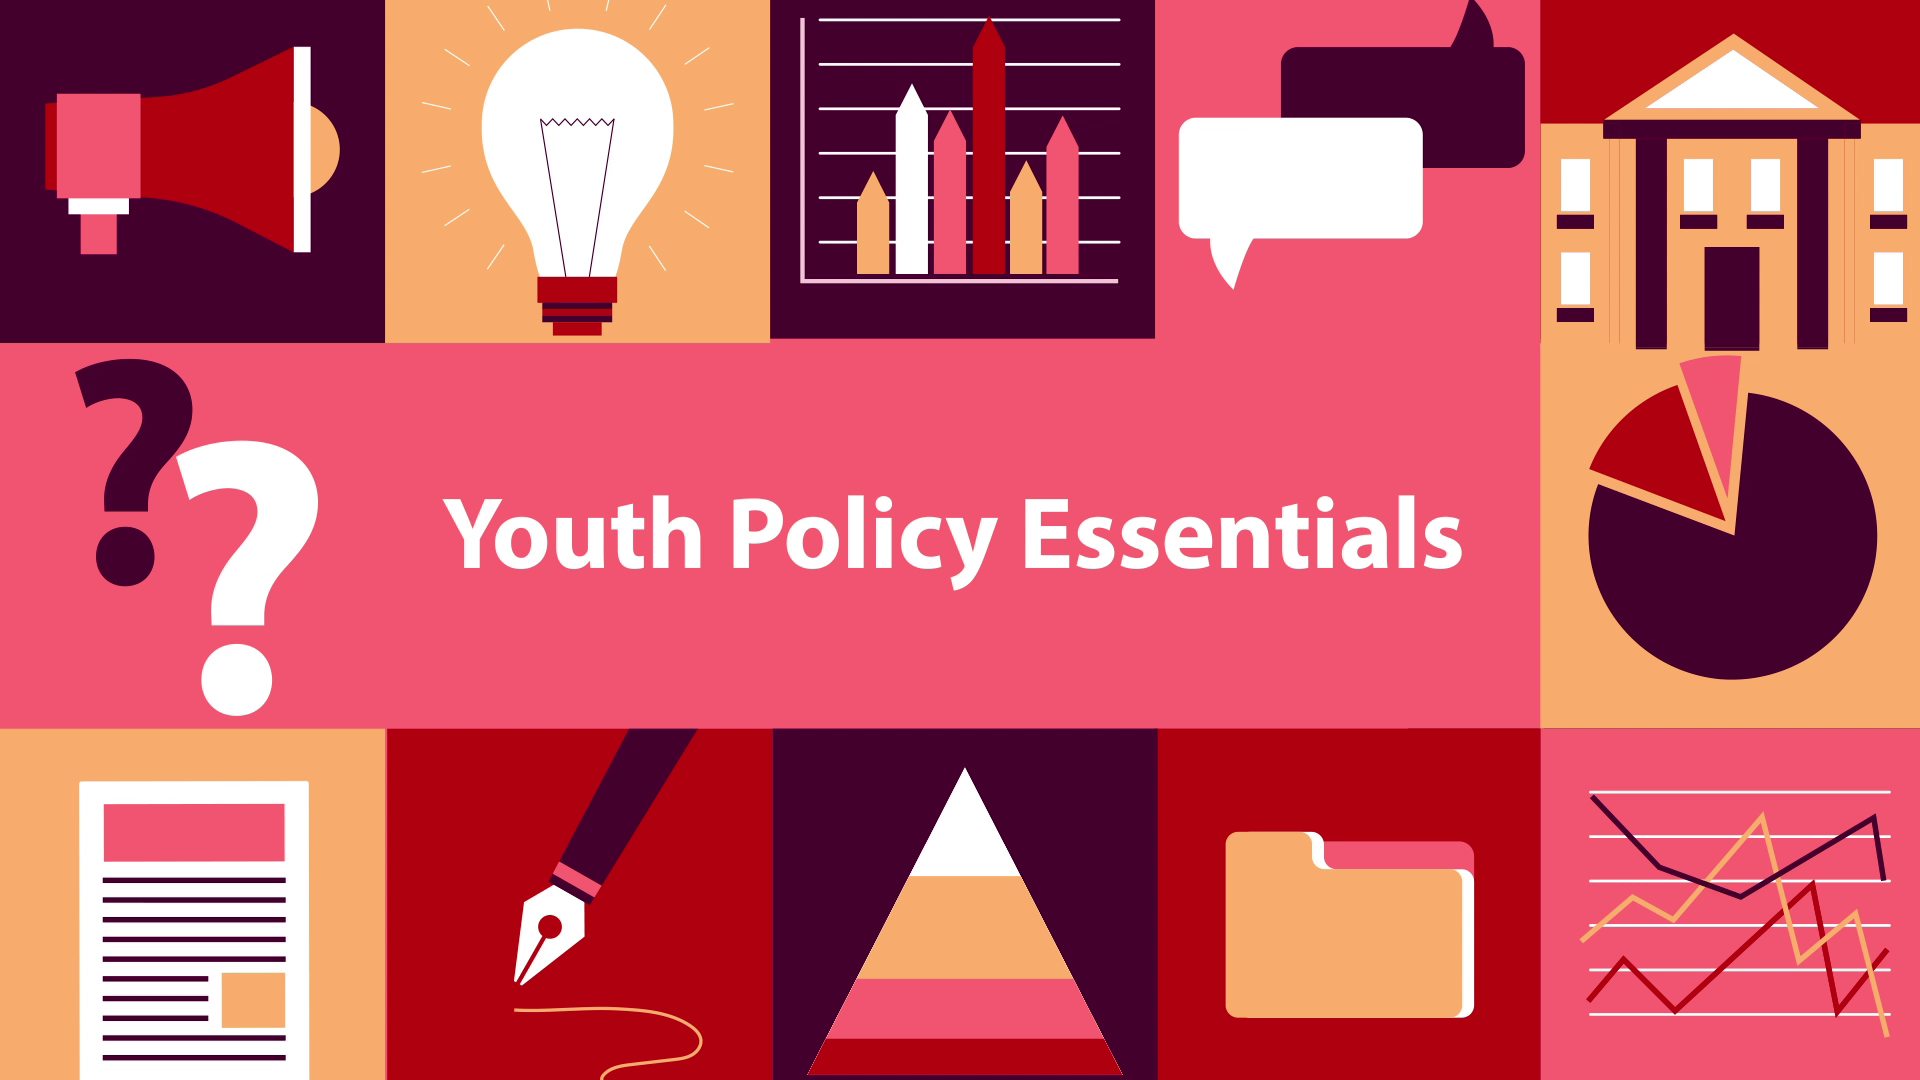 Everything you wanted to know about youth policy